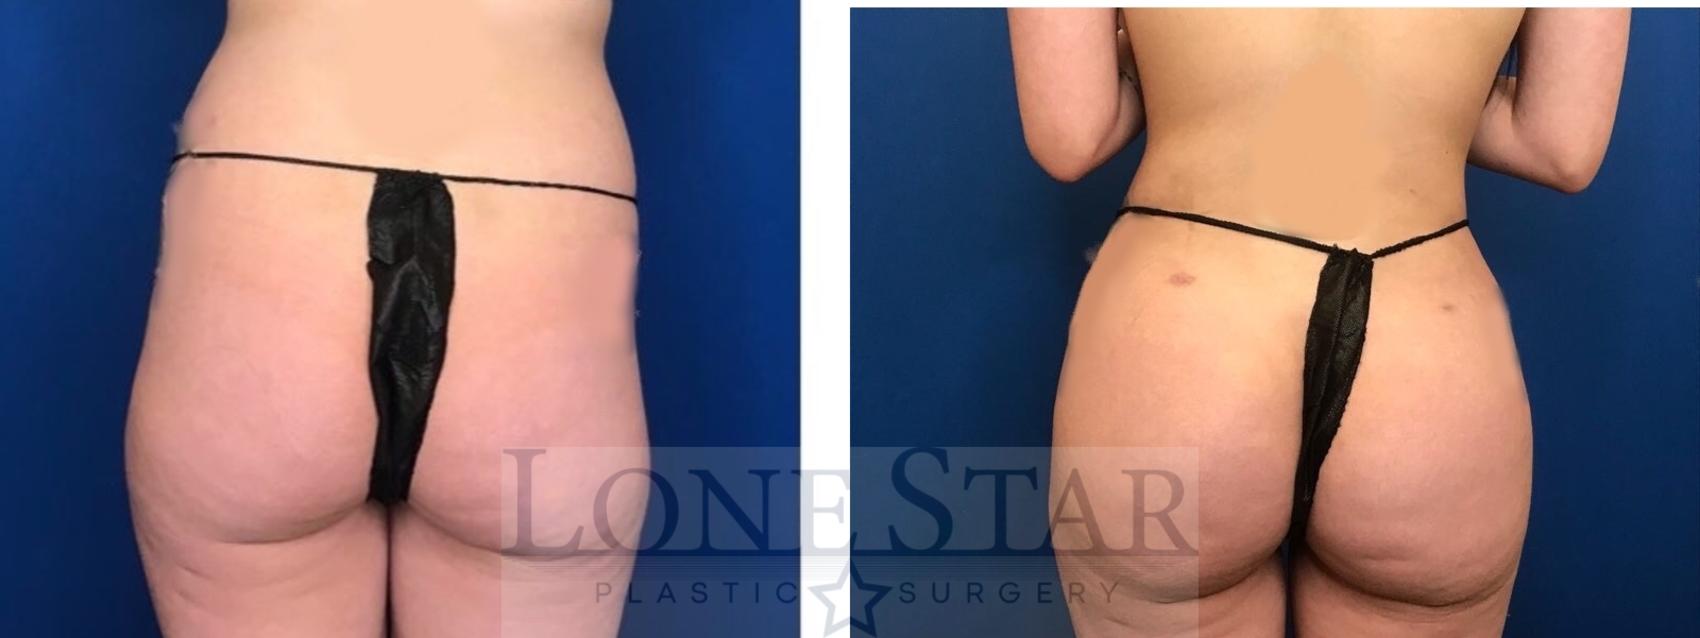 Before & After Brazilian Butt Lift (BBL) Case 106 Back View in Frisco, TX